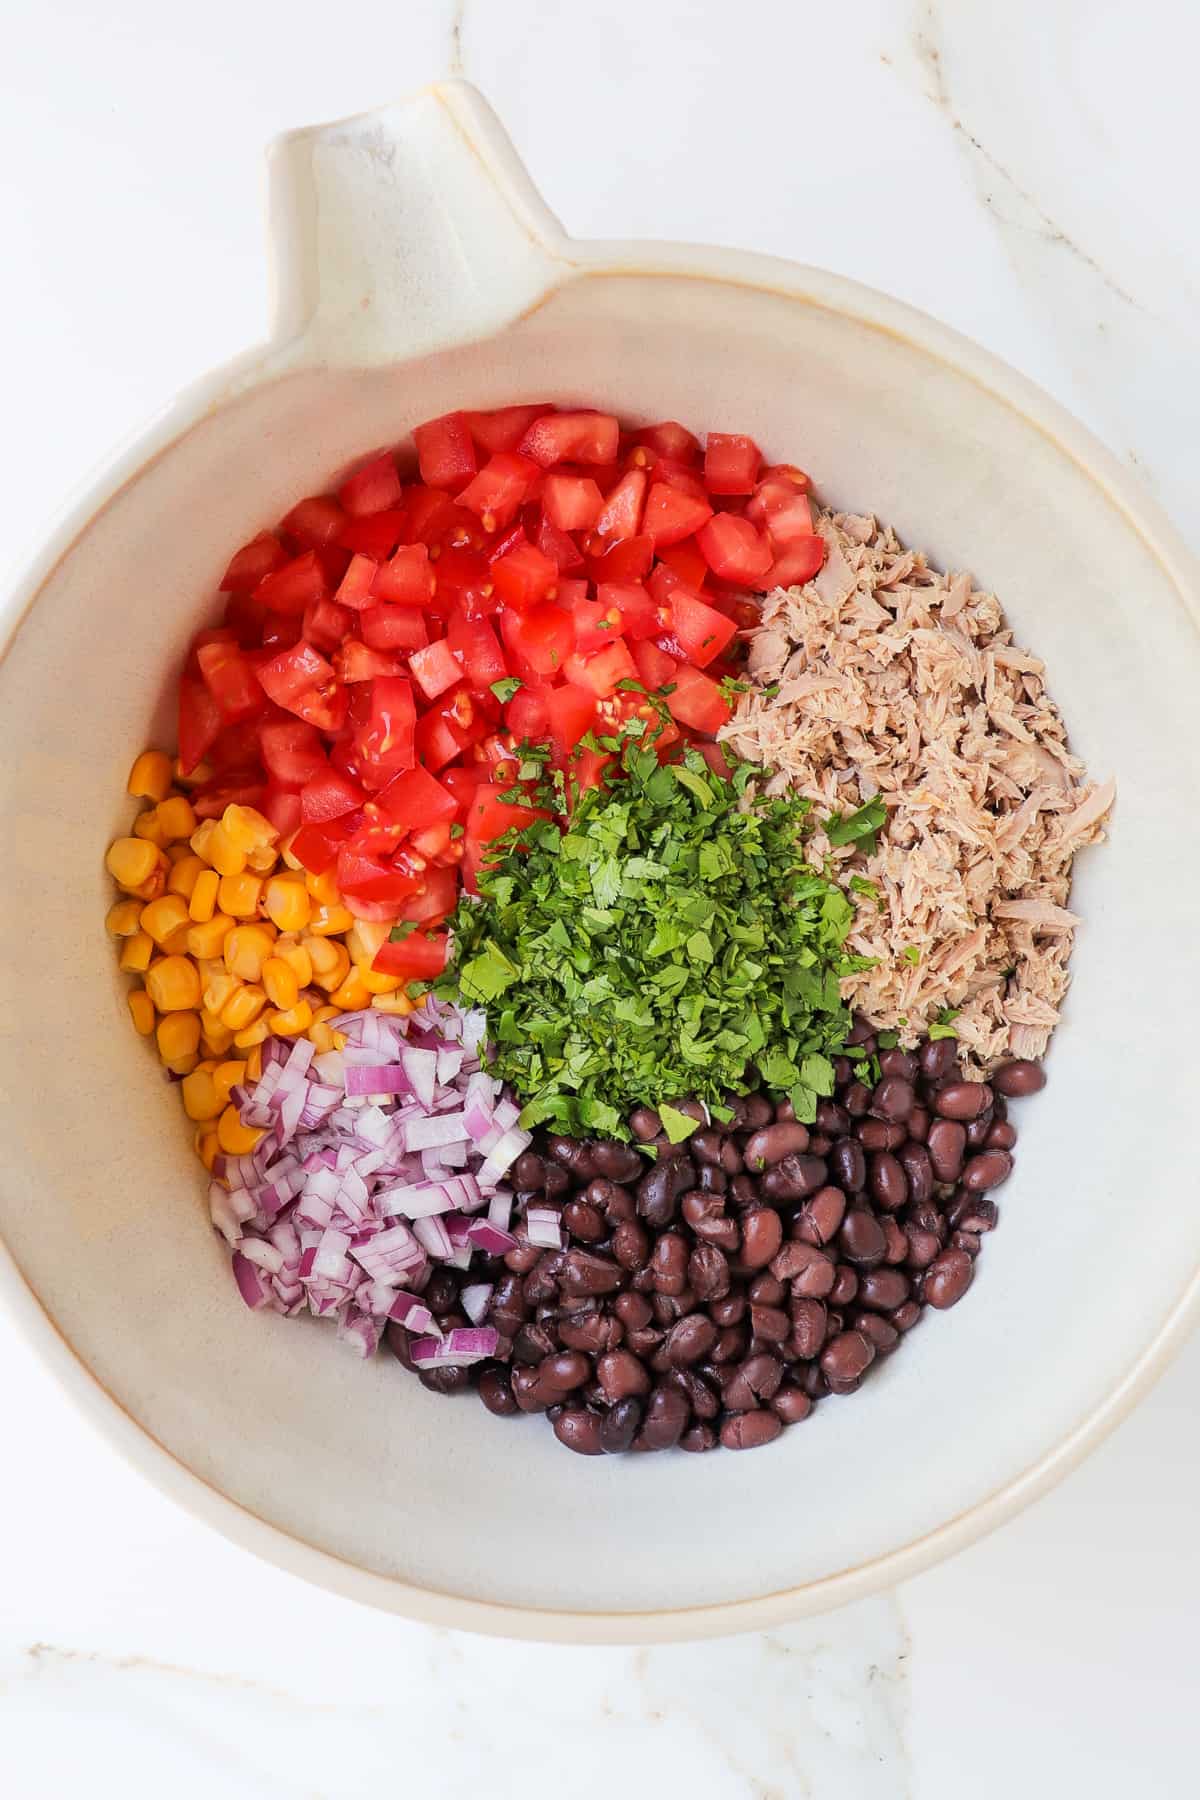 Salad ingredients in a mixing bowl.